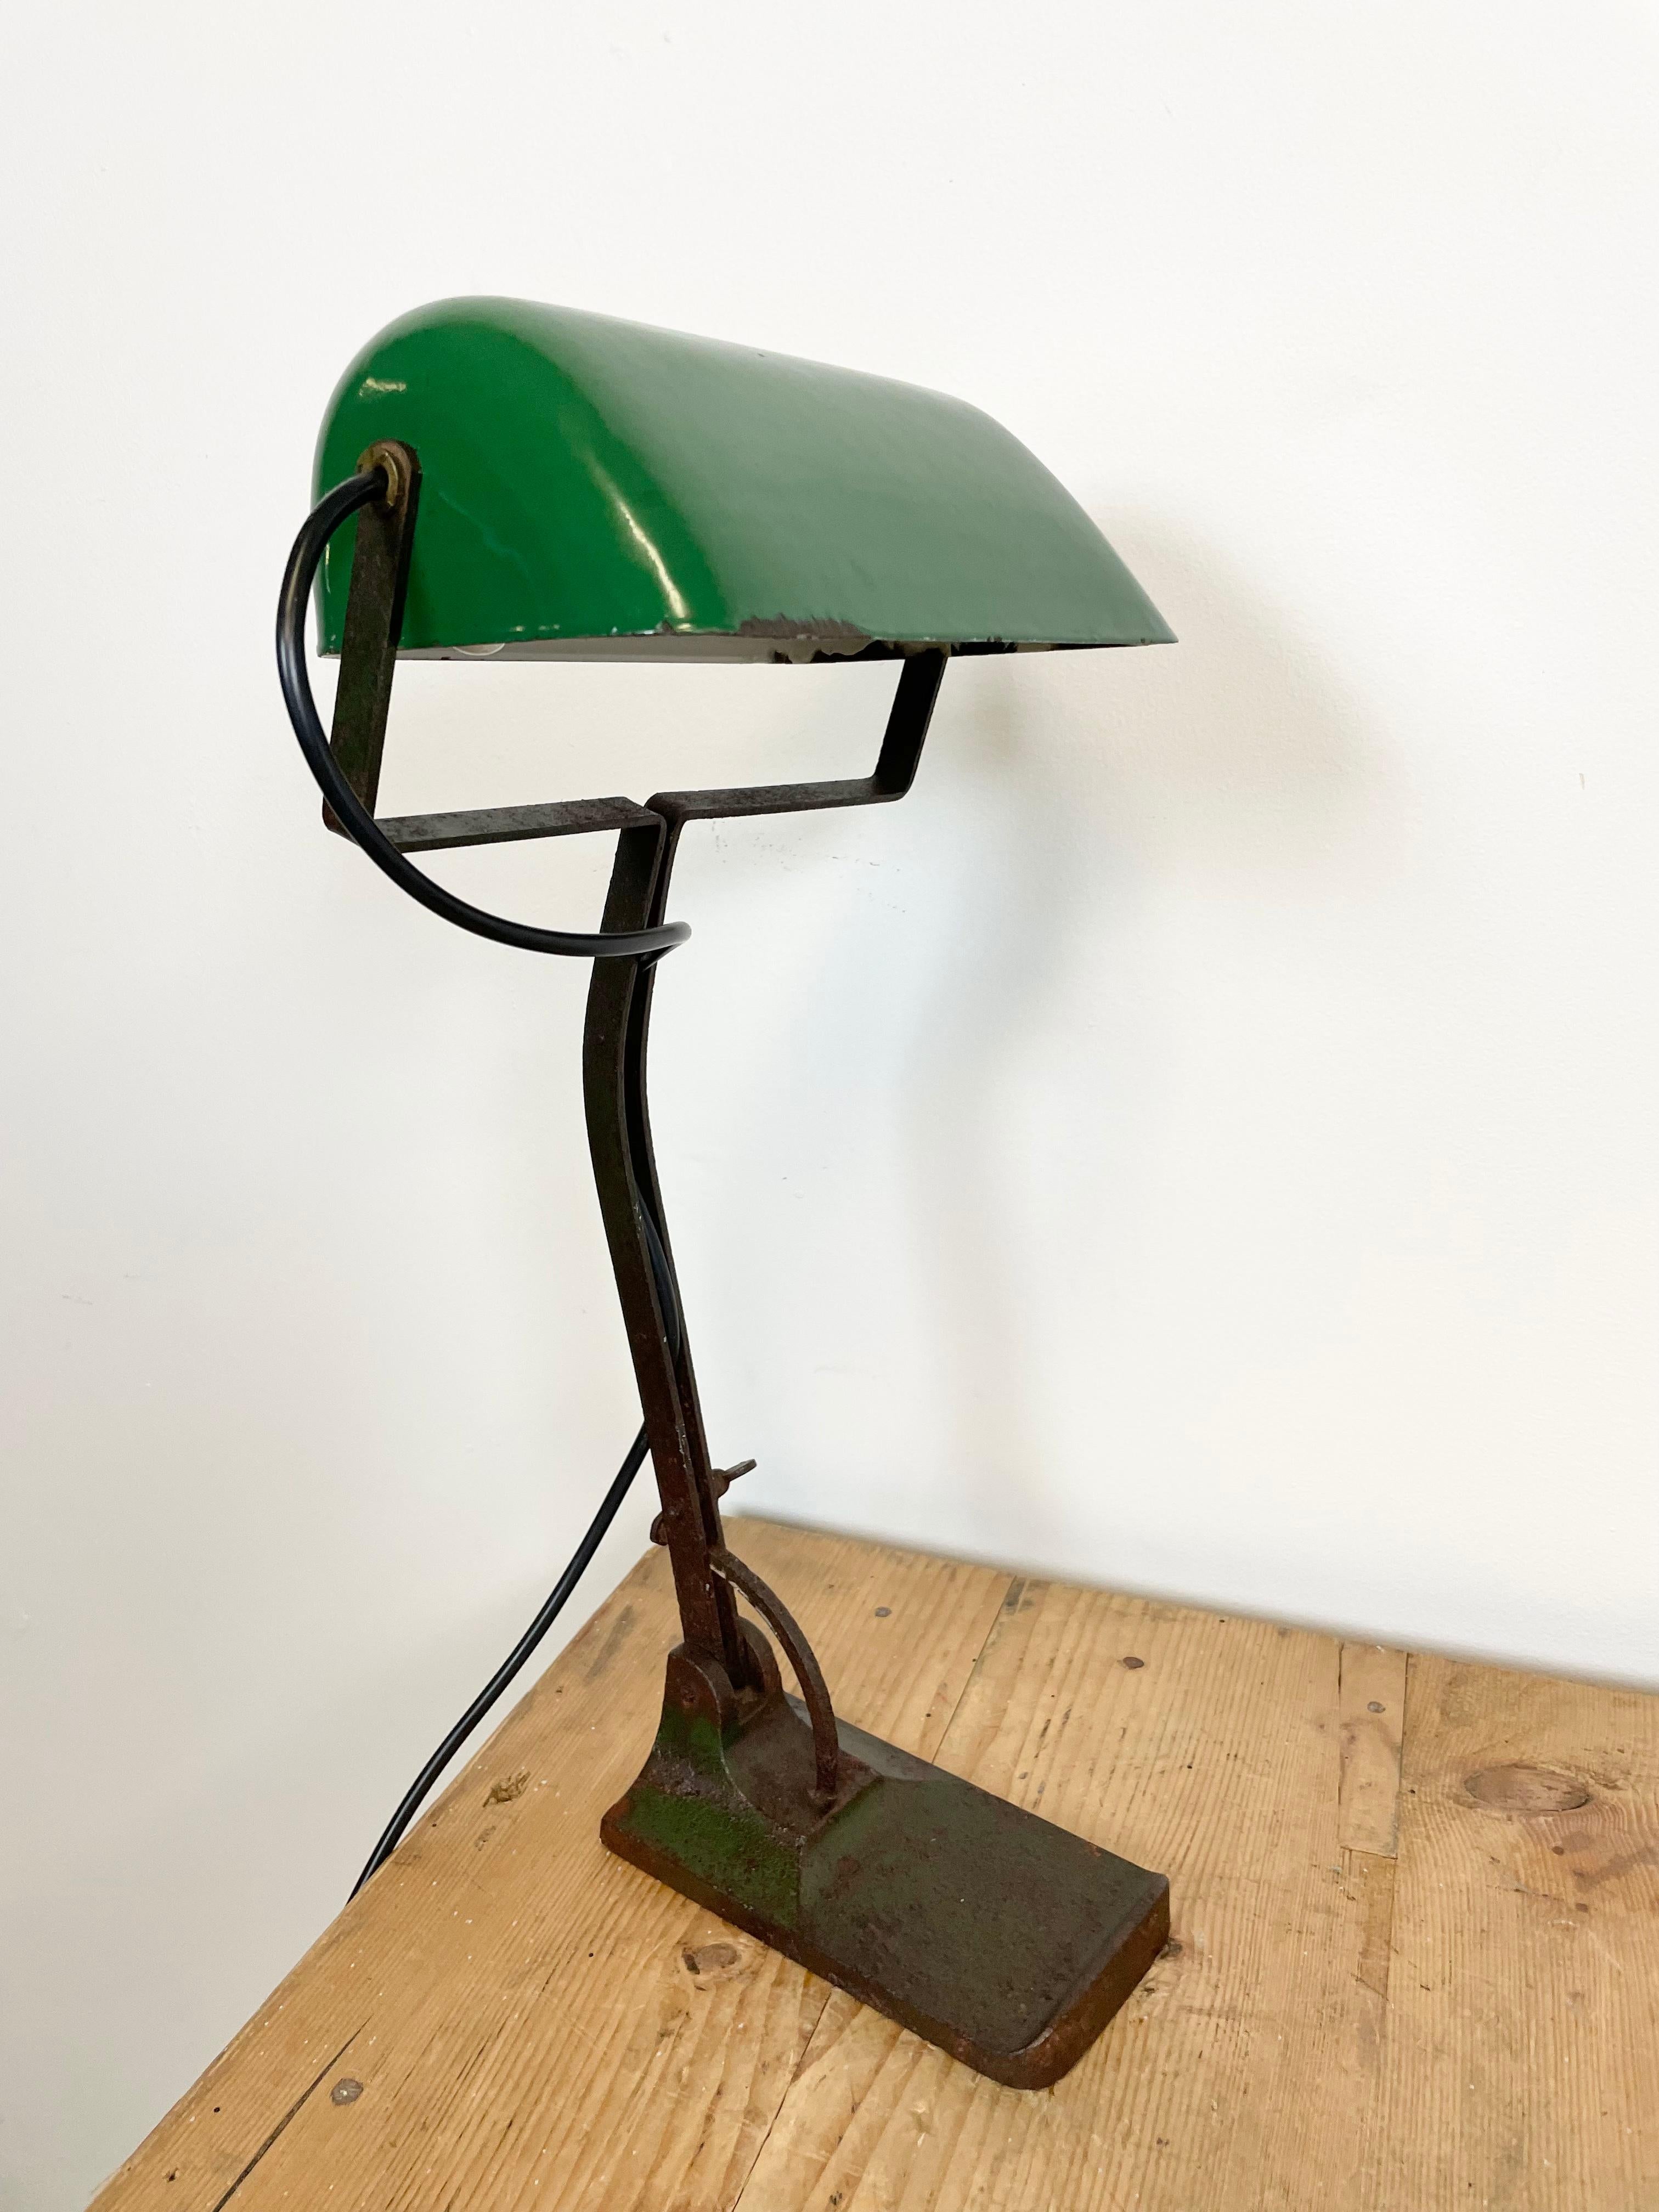 Vintage Green Enamel Bank Lamp from Astral, 1930s In Good Condition For Sale In Kojetice, CZ